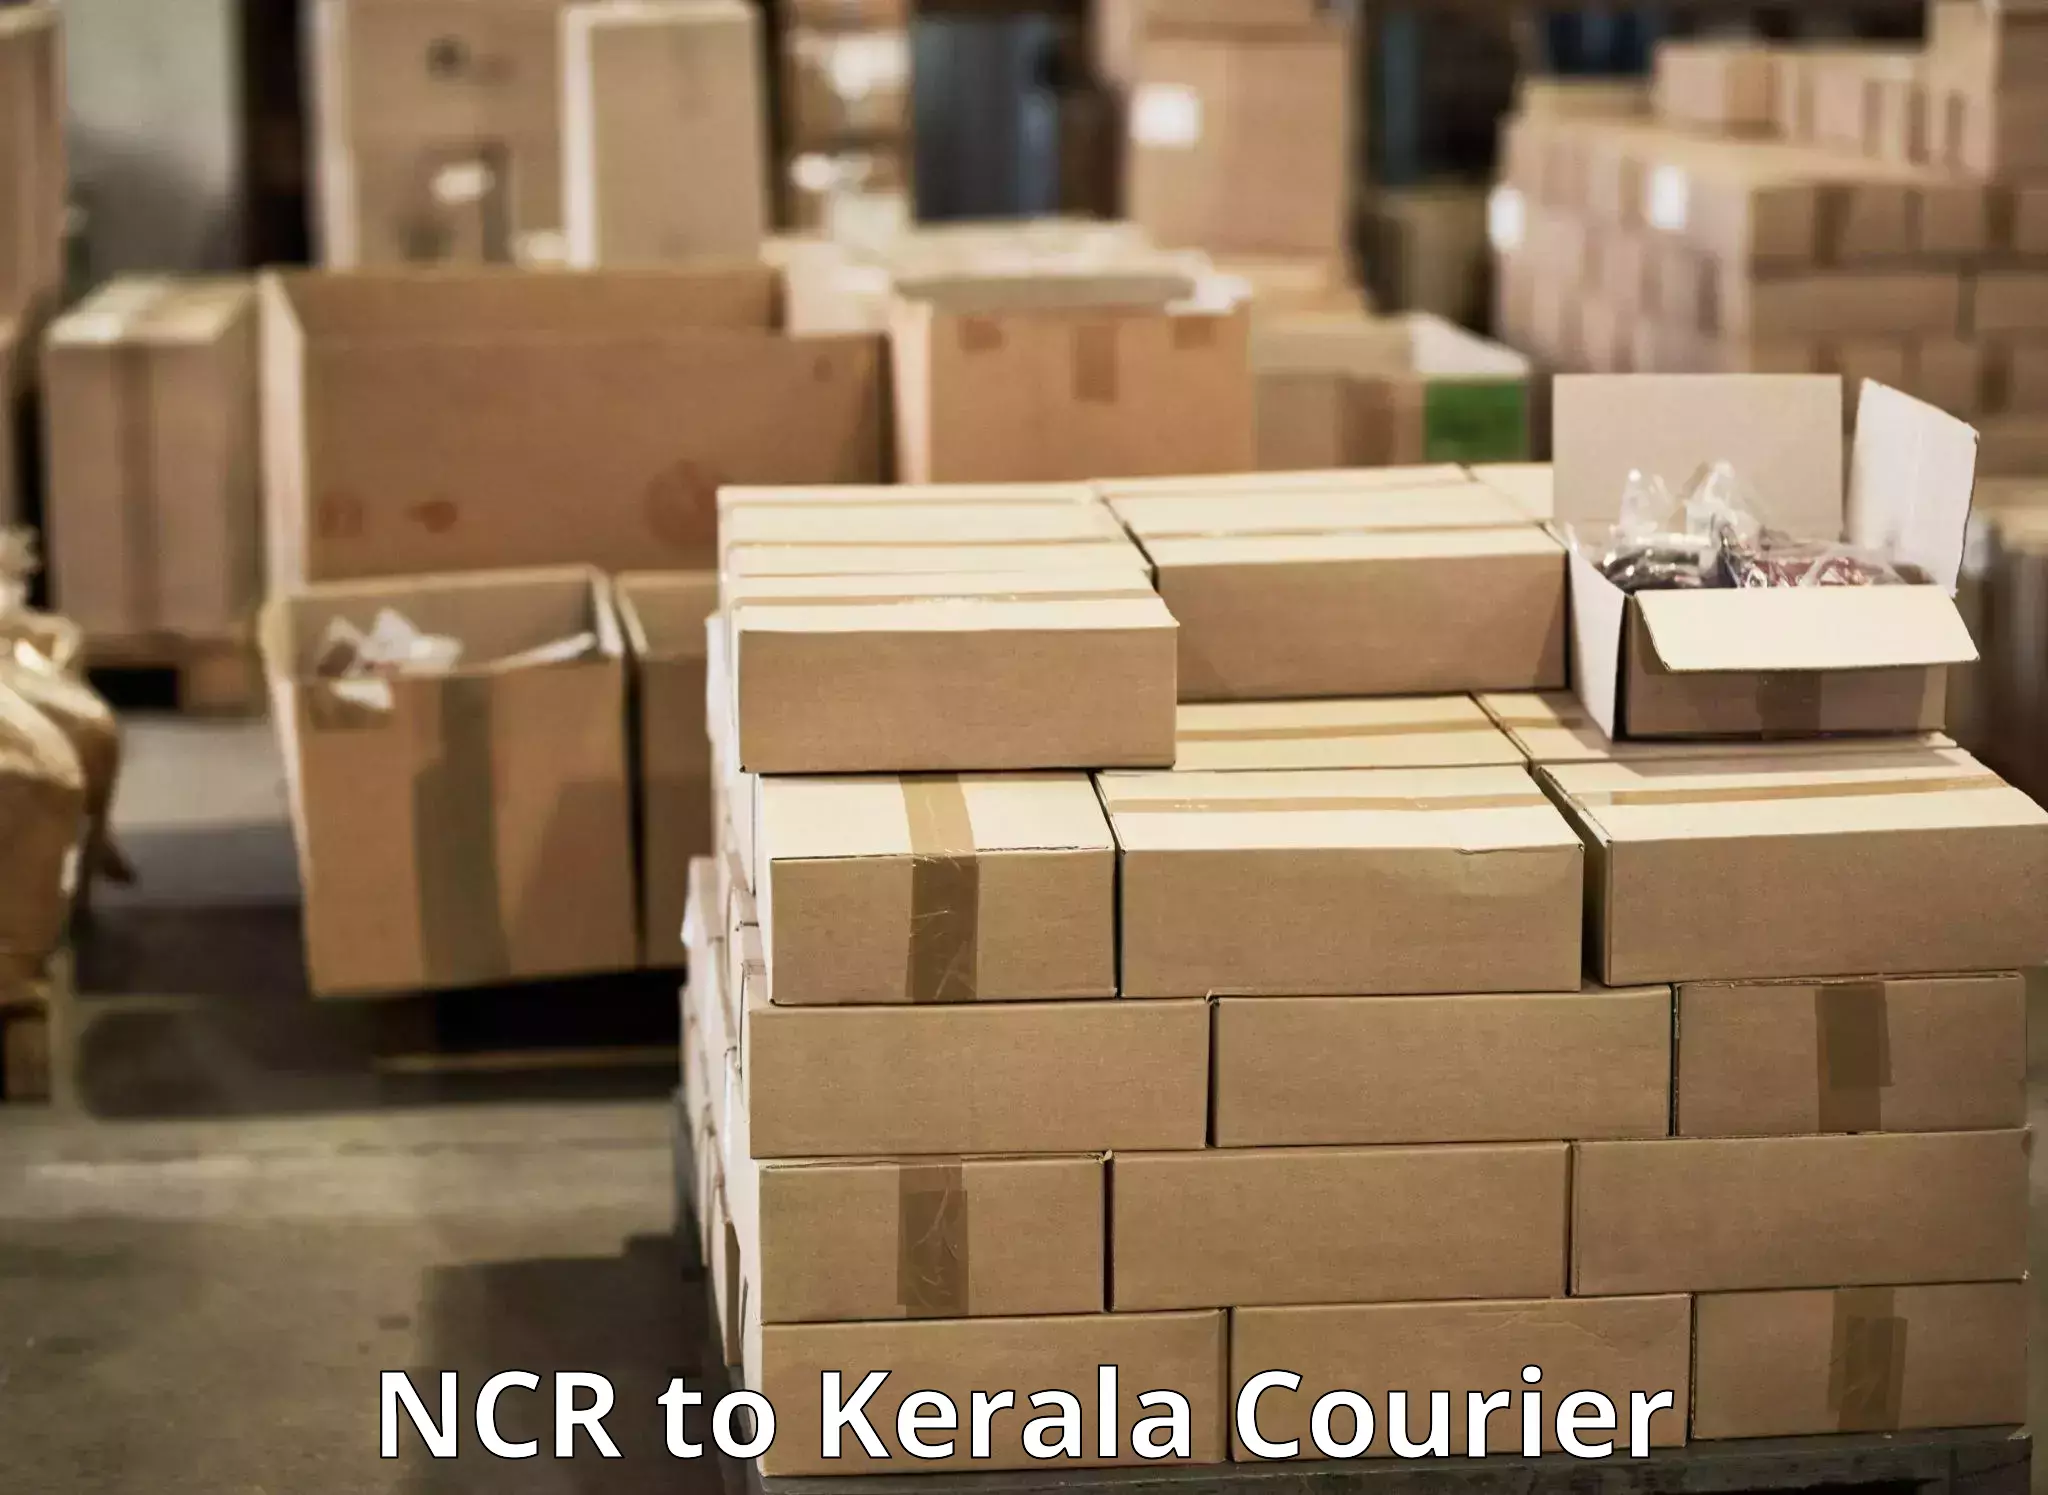 Express mail solutions NCR to Pallikkara